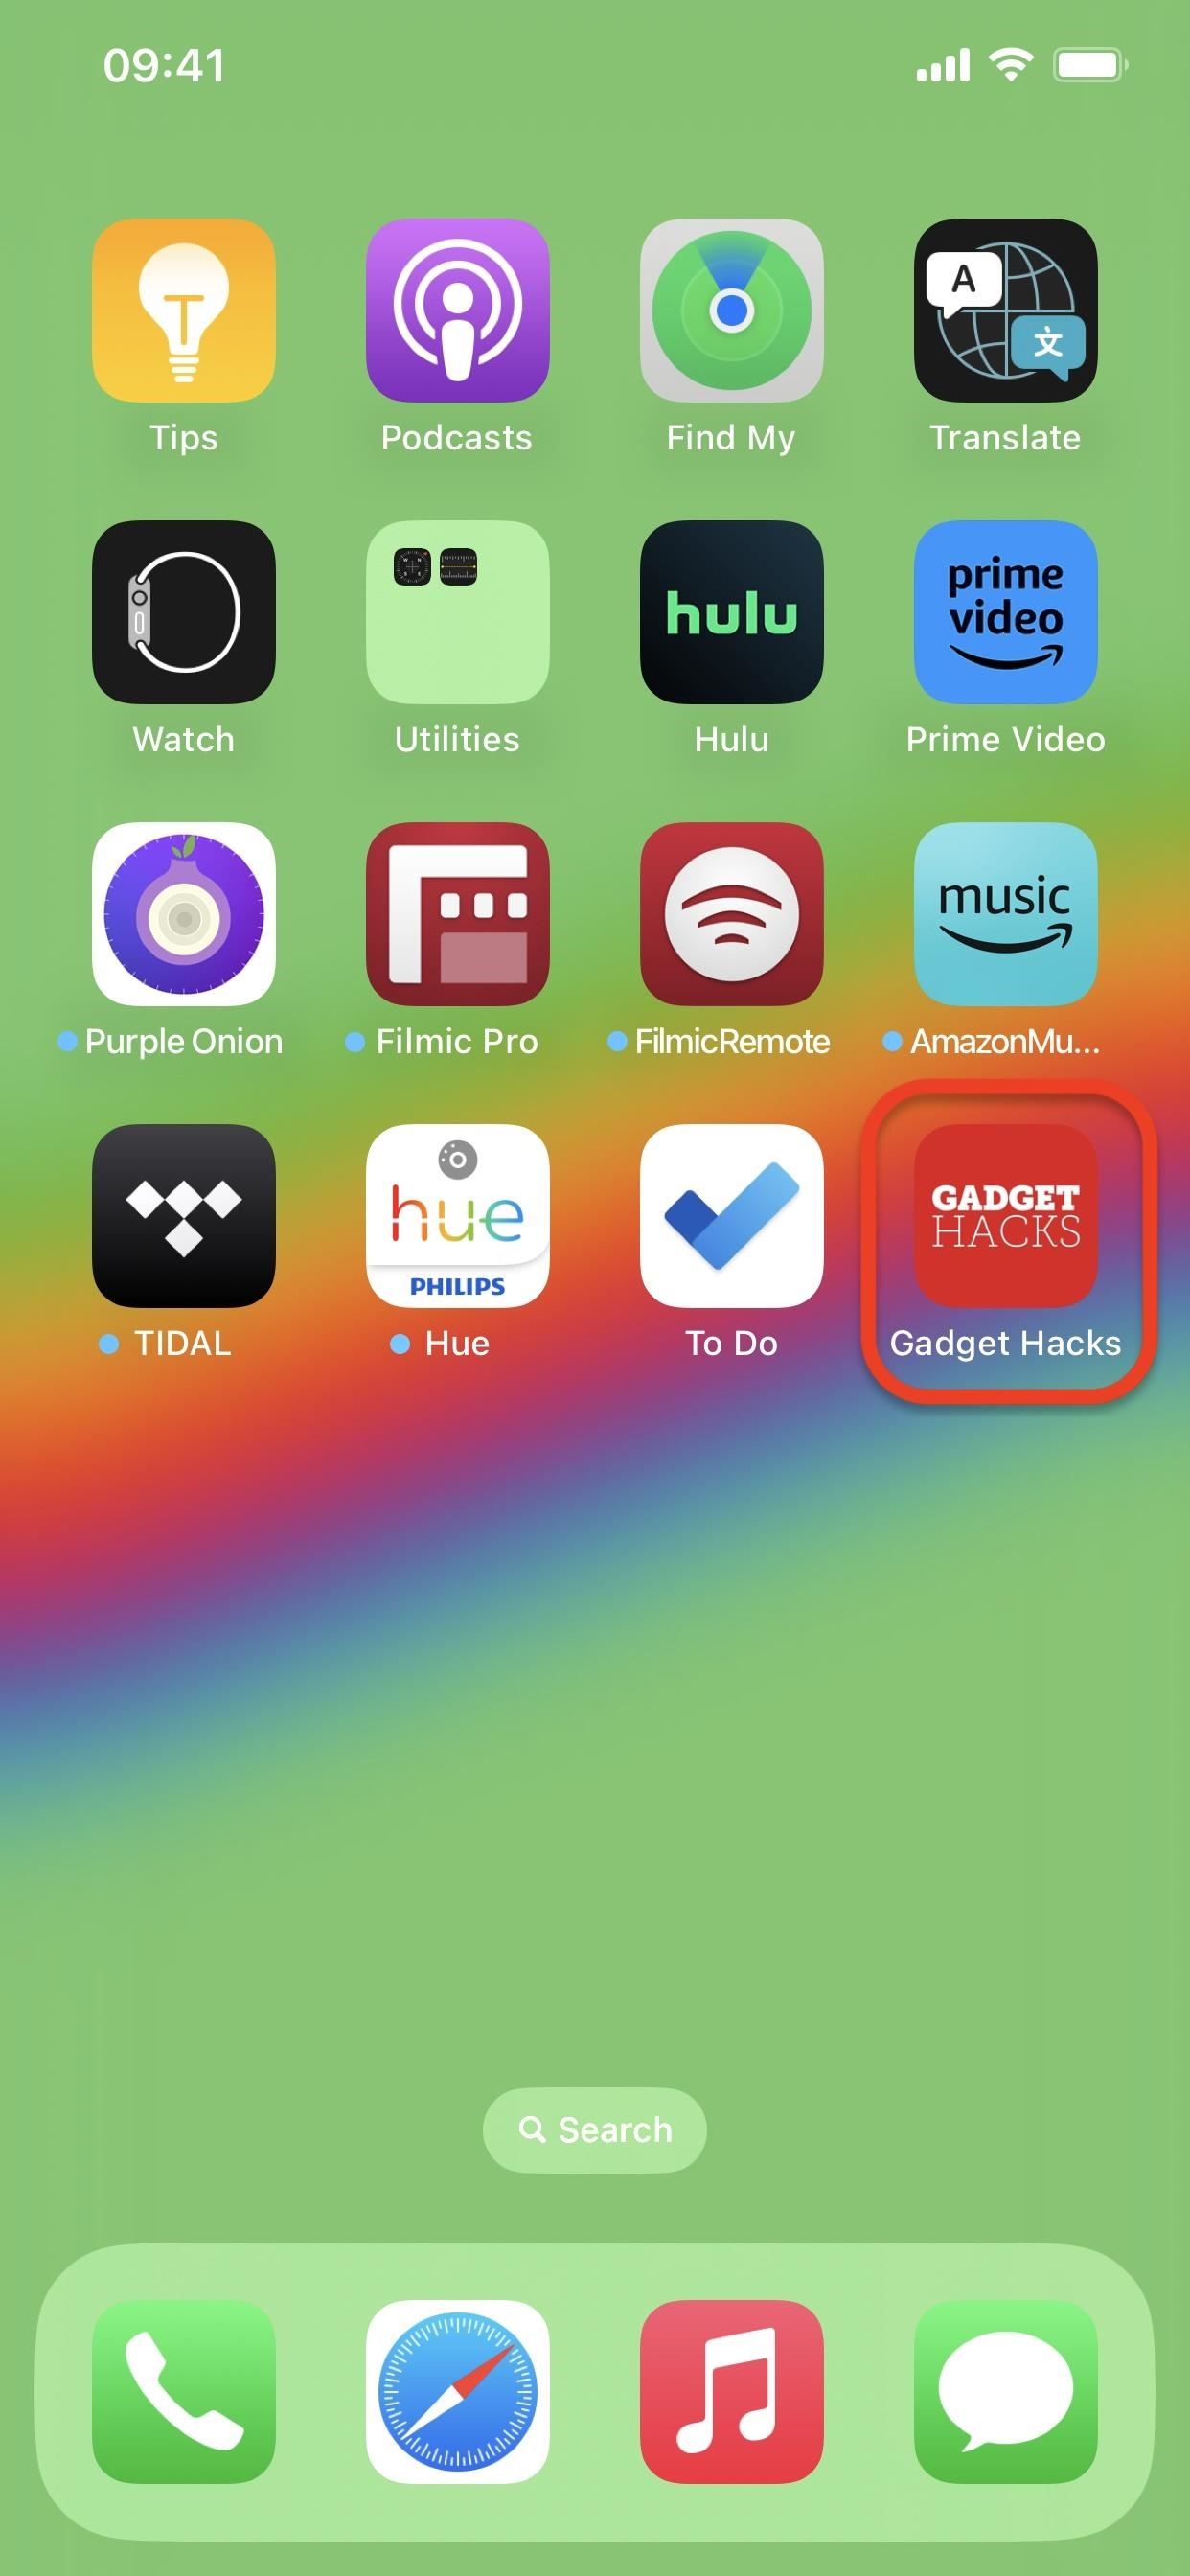 These Browsers Let You Add Web Apps and Bookmarks to Your iPhone's Home Screen